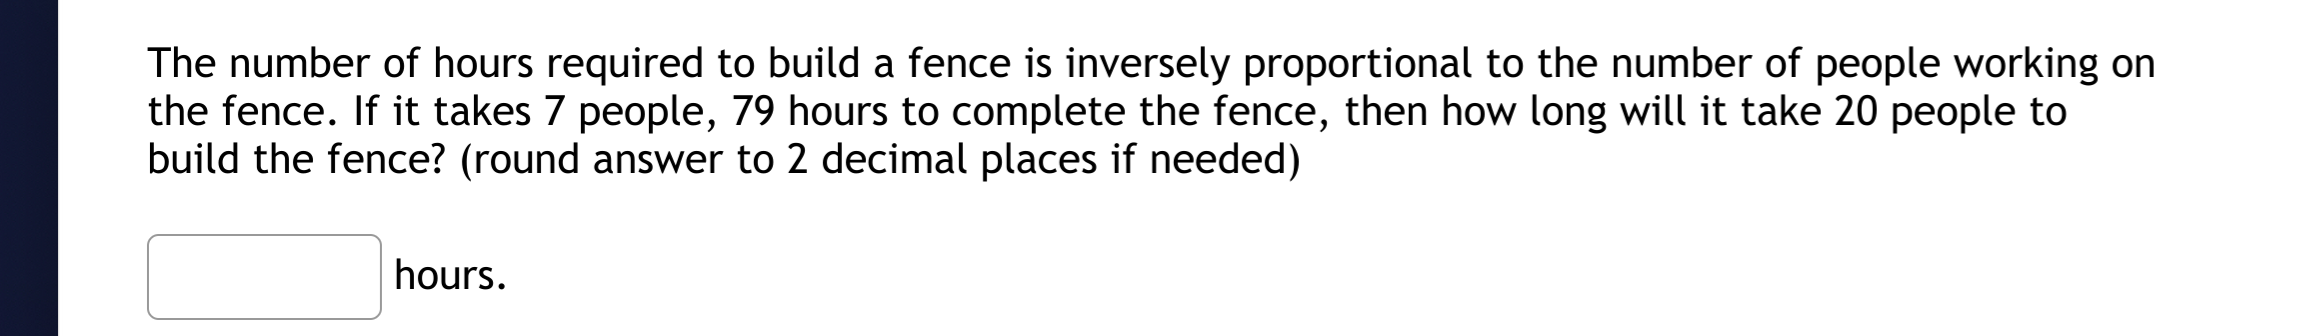 The number of hours required to build a fence is inversely proportional to the number of people working on
the fence. If it takes 7 people, 79 hours to complete the fence, then how long will it take 20 people to
build the fence? (round answer to 2 decimal places if needed)
